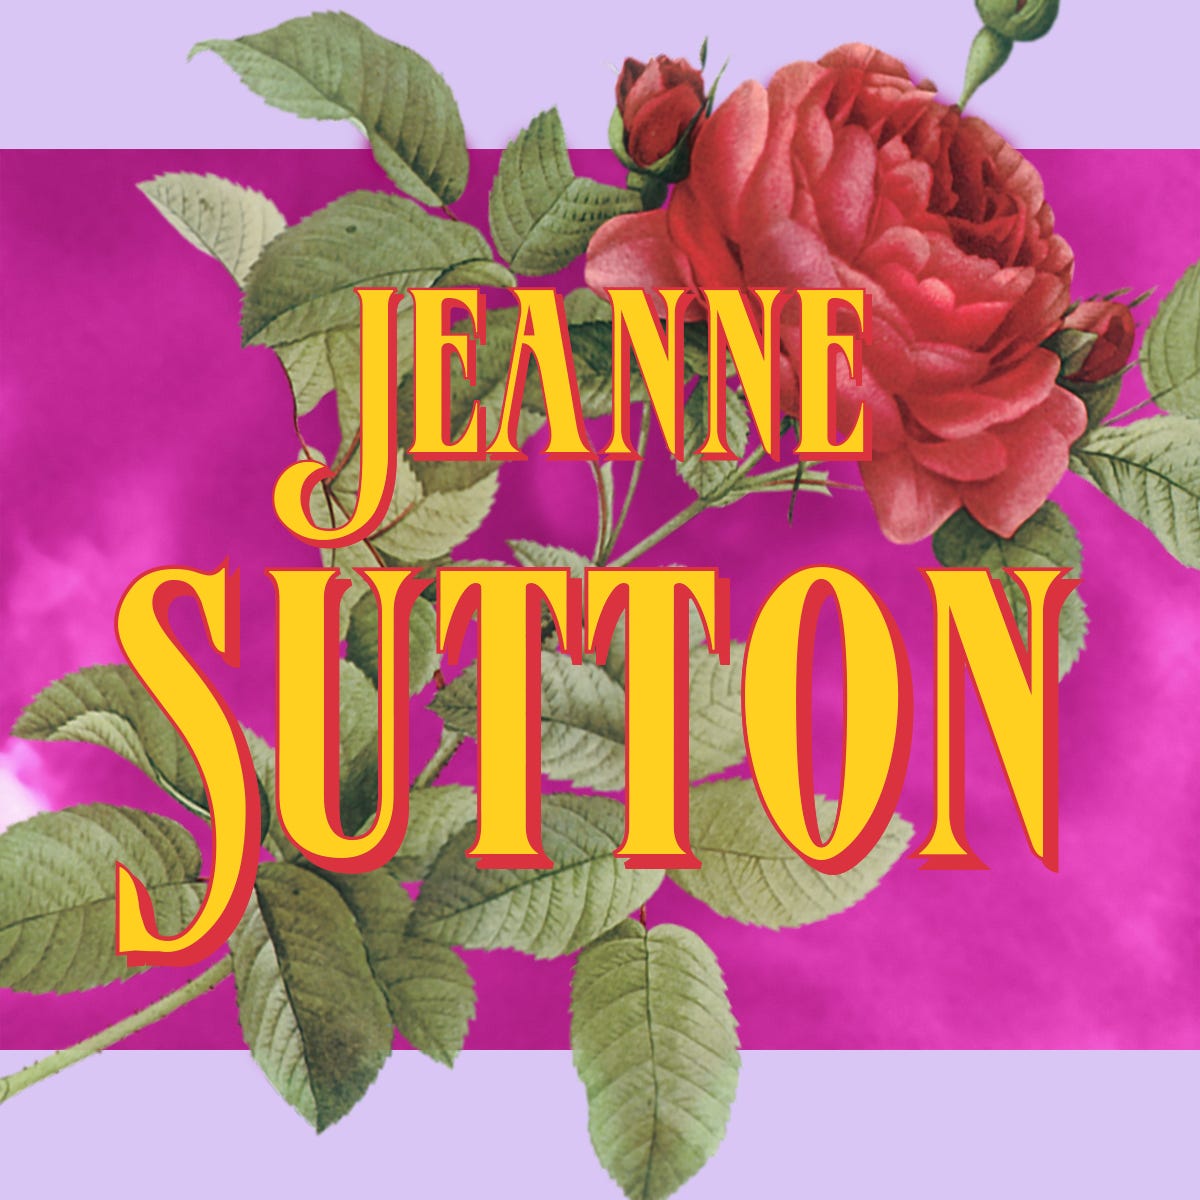 Artwork for by Jeanne Sutton